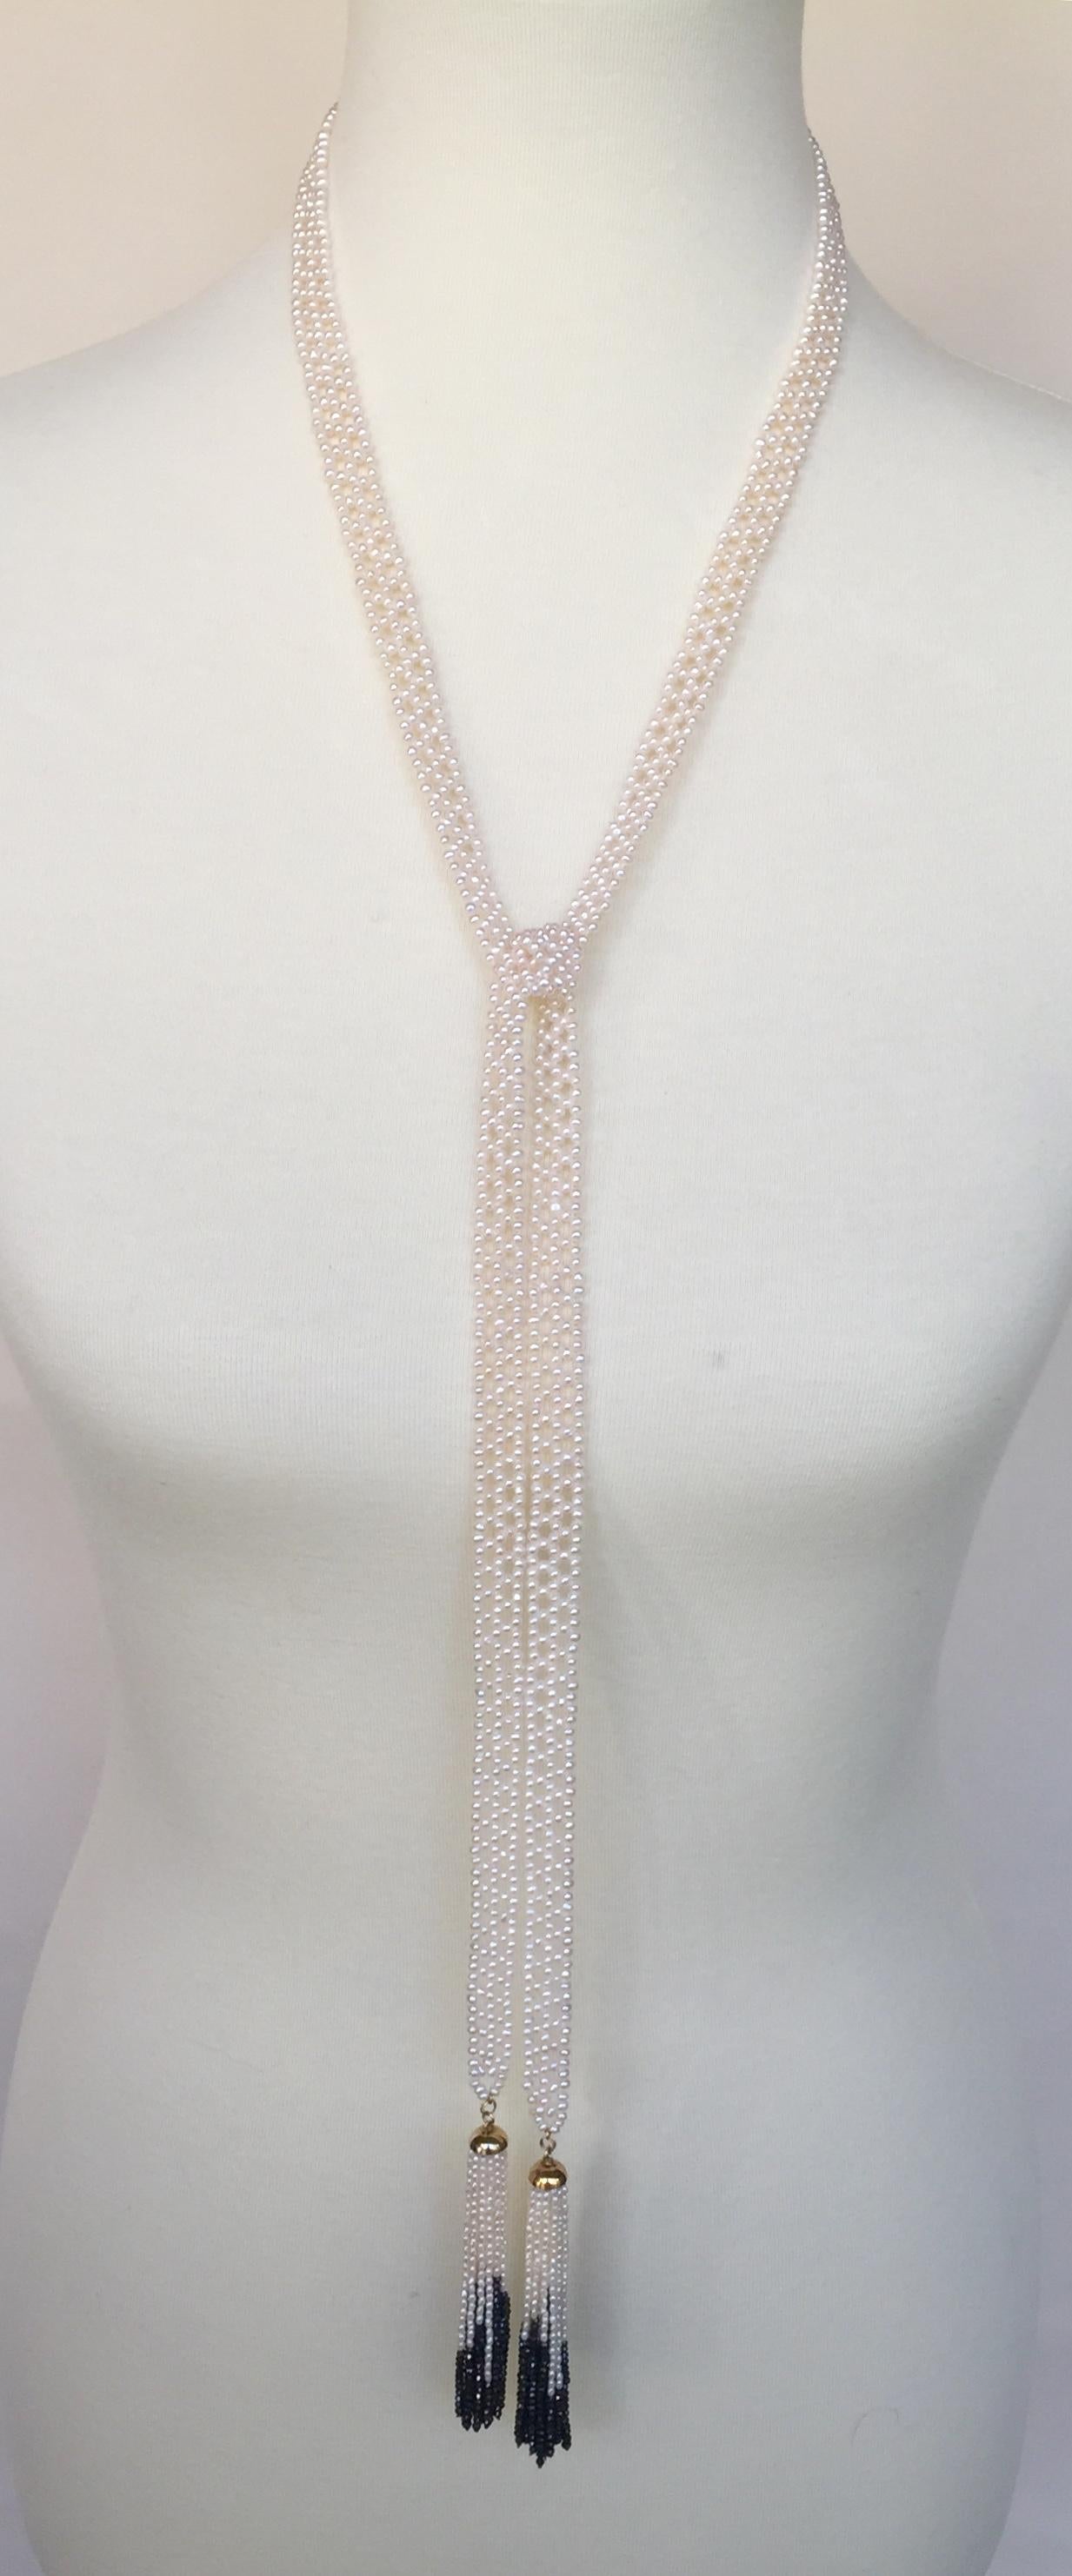 Woven with small white pearls this sautoir is highlighted with 14k yellow gold, white pearl, and faceted black spinel tassels. This Art Deco inspired piece is a beautiful sautoir necklace that has a variety of wearable options from the classic to